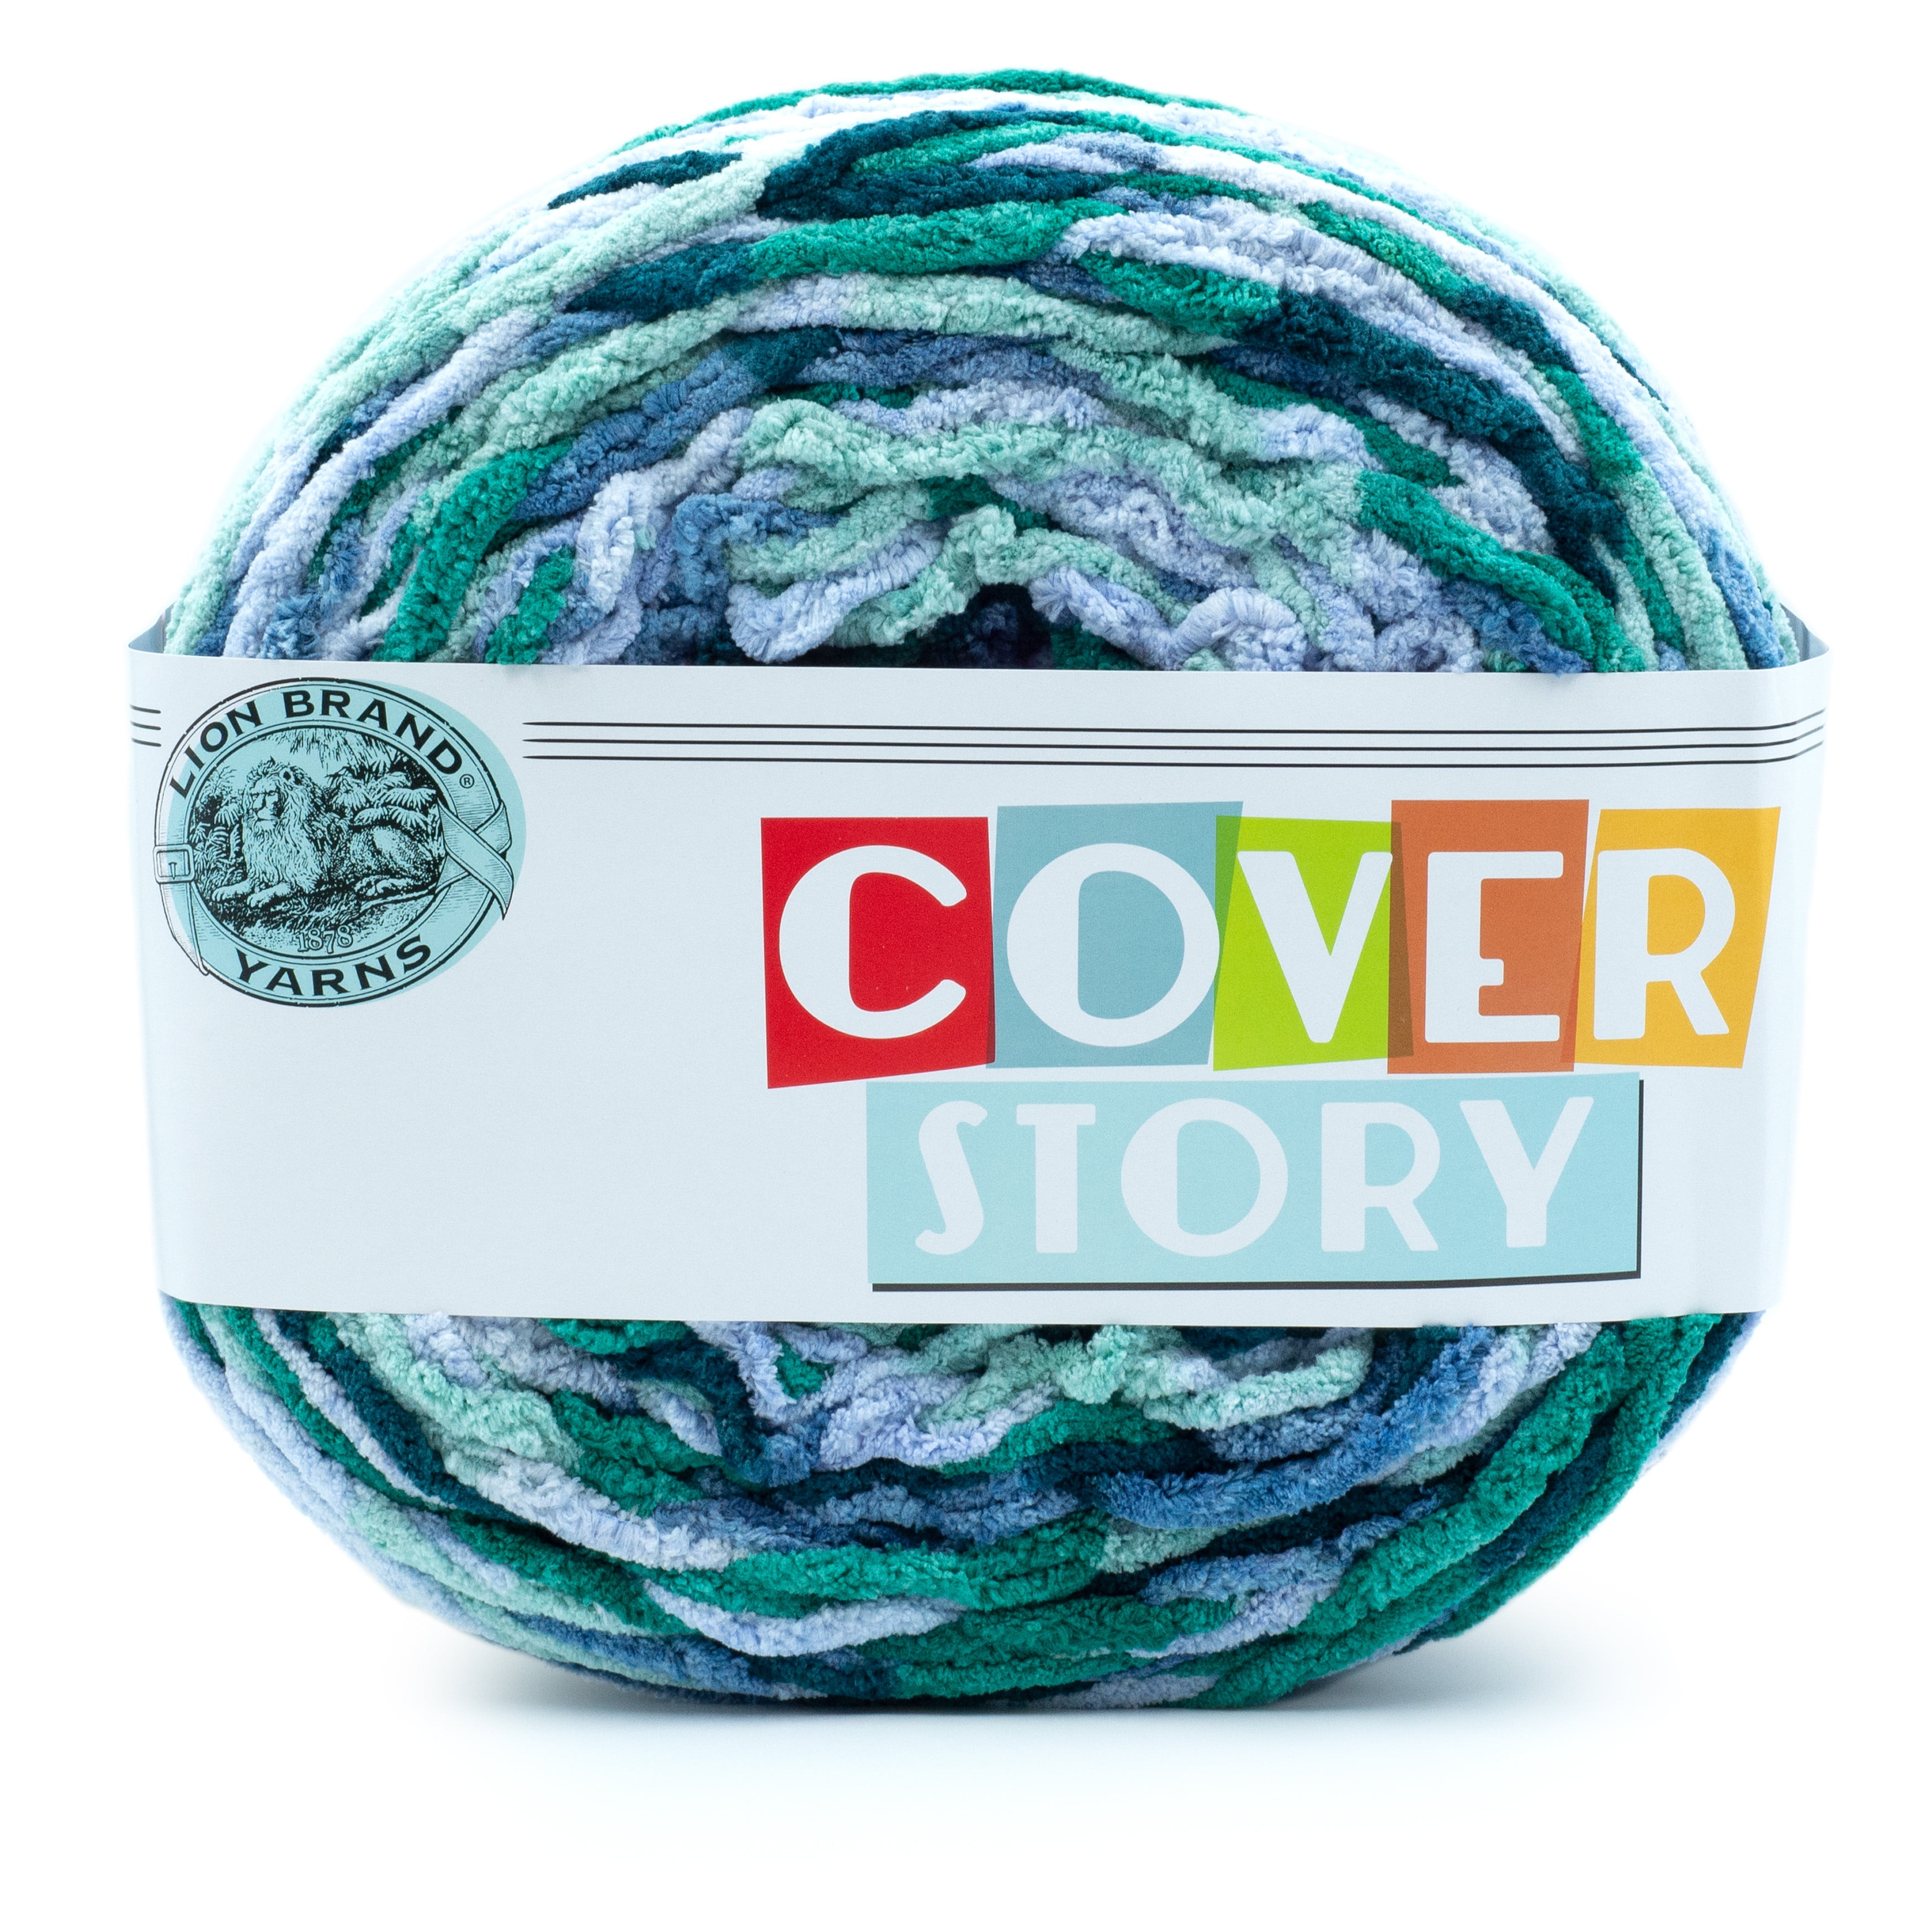 How To Make LION BRAND COVER STORY Tybee Afghan Online